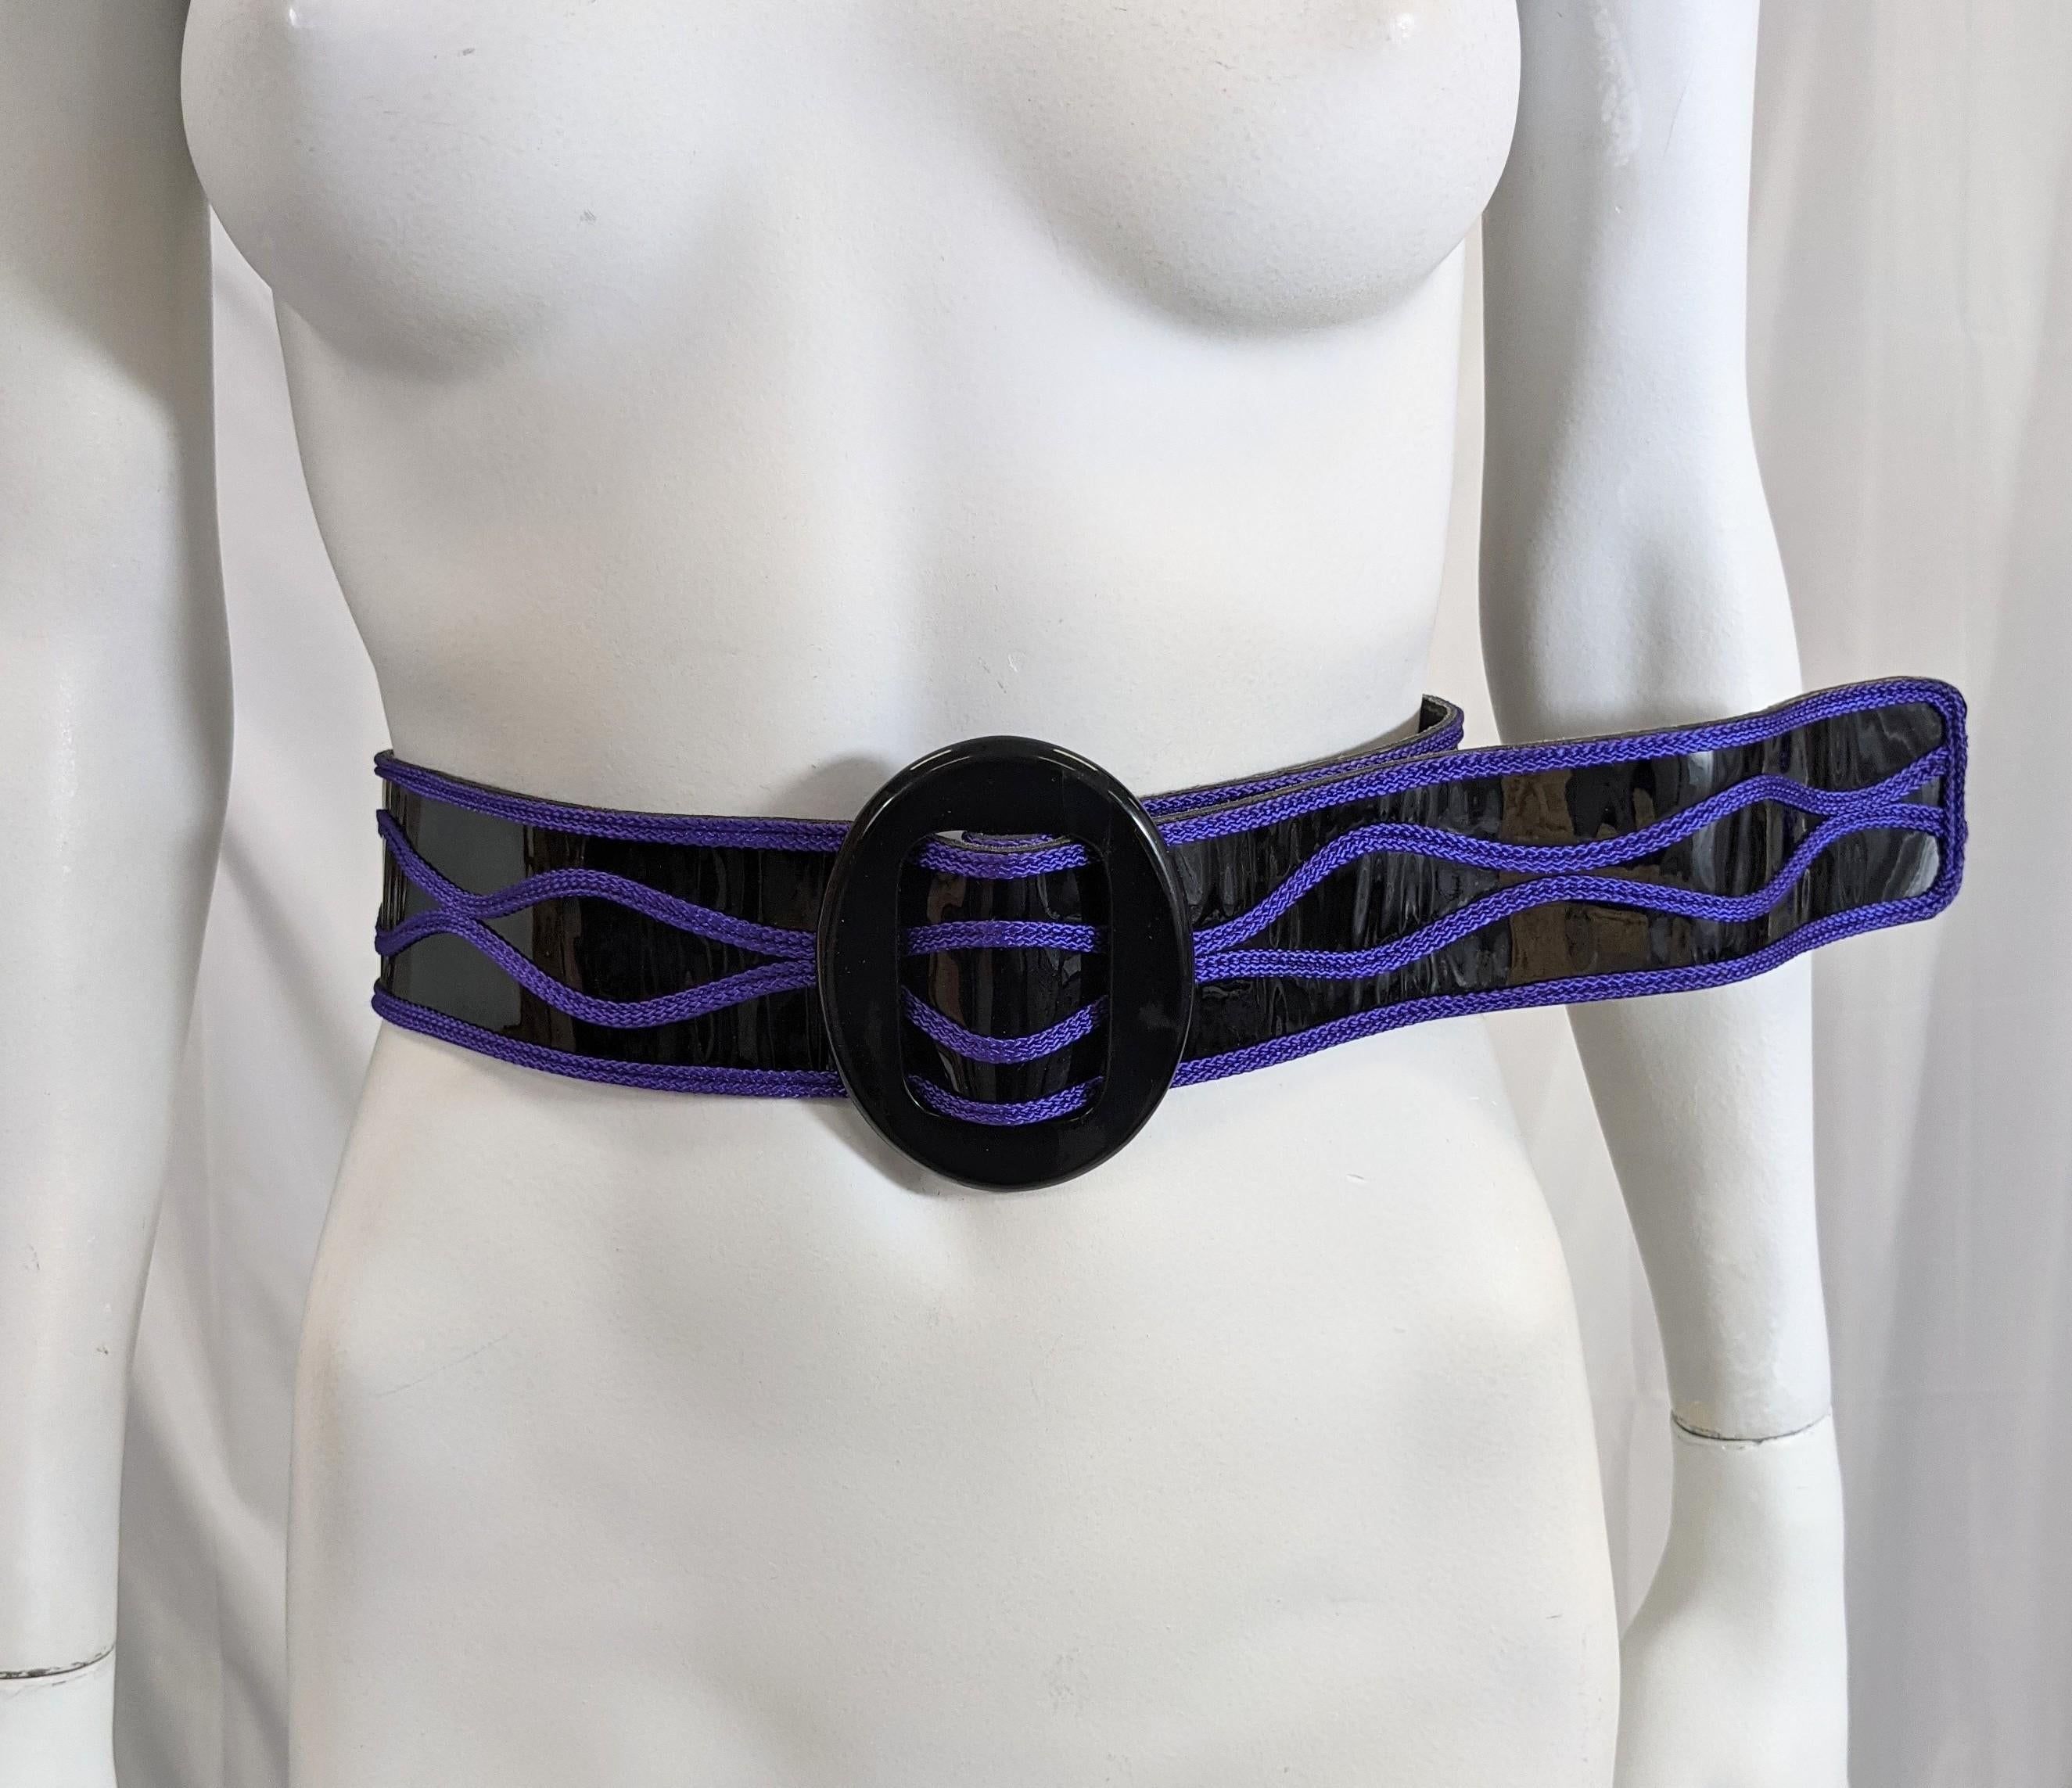 Striking Givenchy belt of black patent leather with vibrant purple soutache trim and large oval bakelite buckle. Slides and holds with no hoods or eyes. 
1980's France. 35